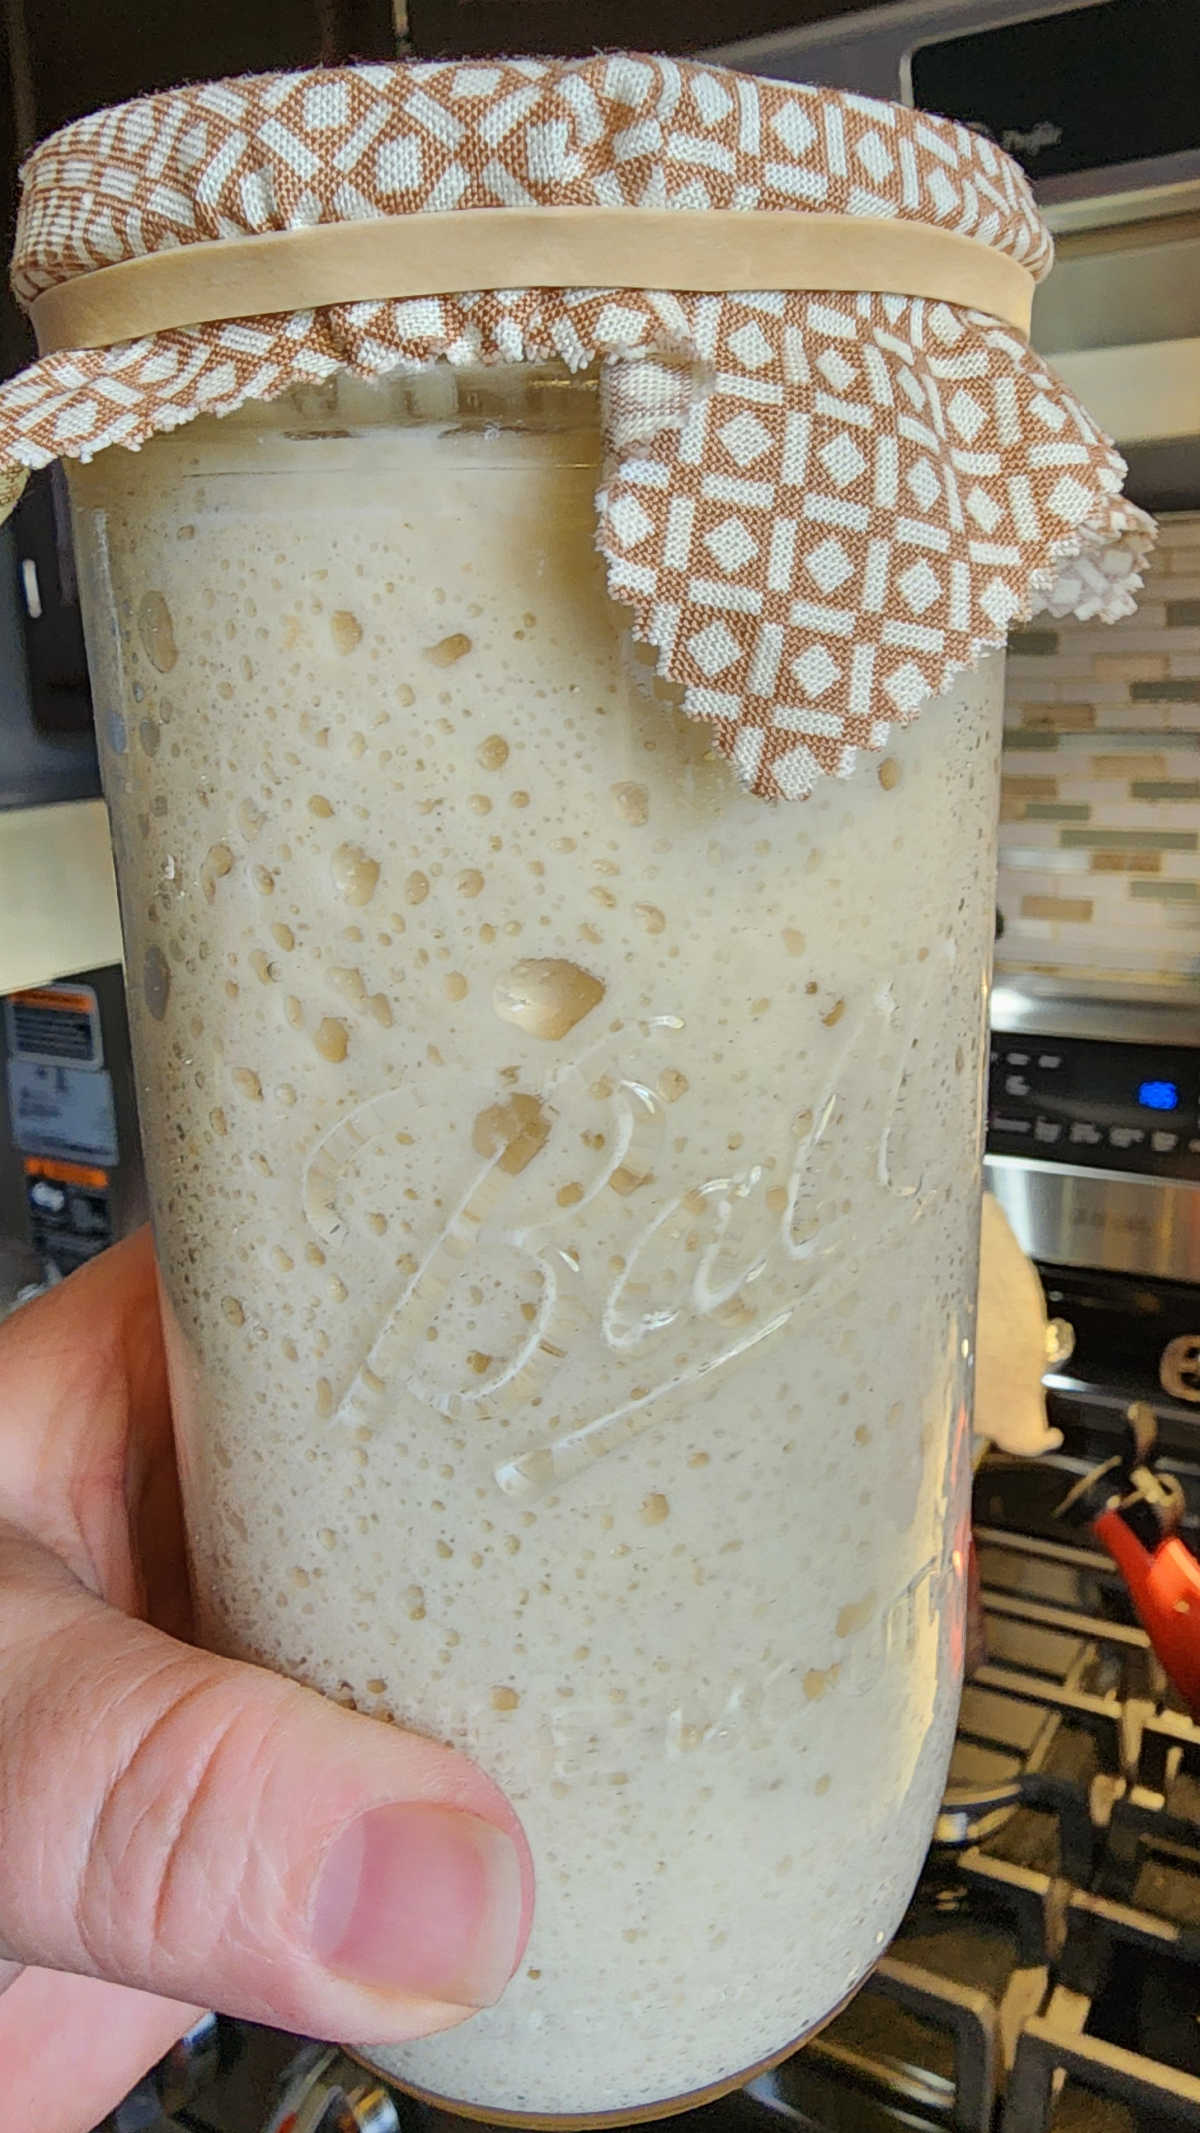 Jar of sourdough starter with bubbles, top covered with fabric square and rubber band.